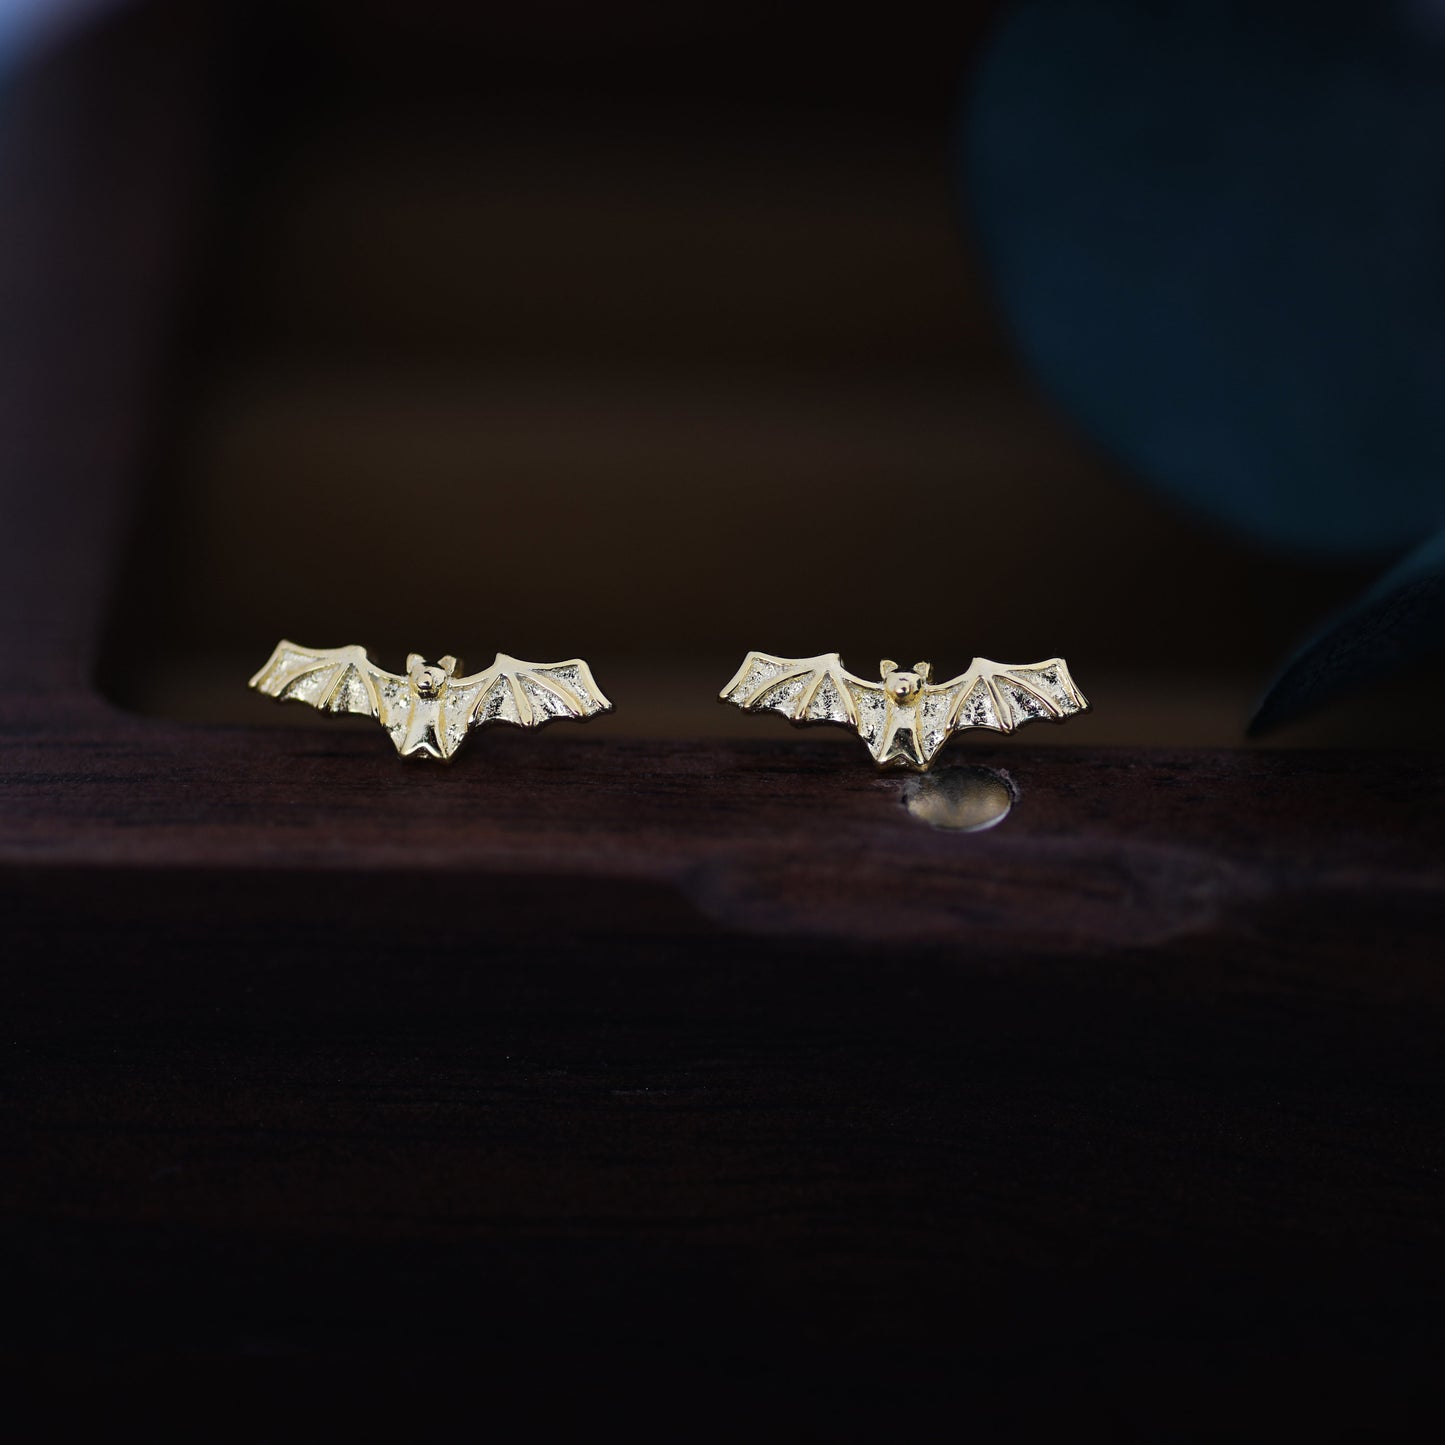 Extra Tiny Bat Stud Earrings in Sterling Silver, Silver or Gold, Stacking Earrings, Animal Earrings